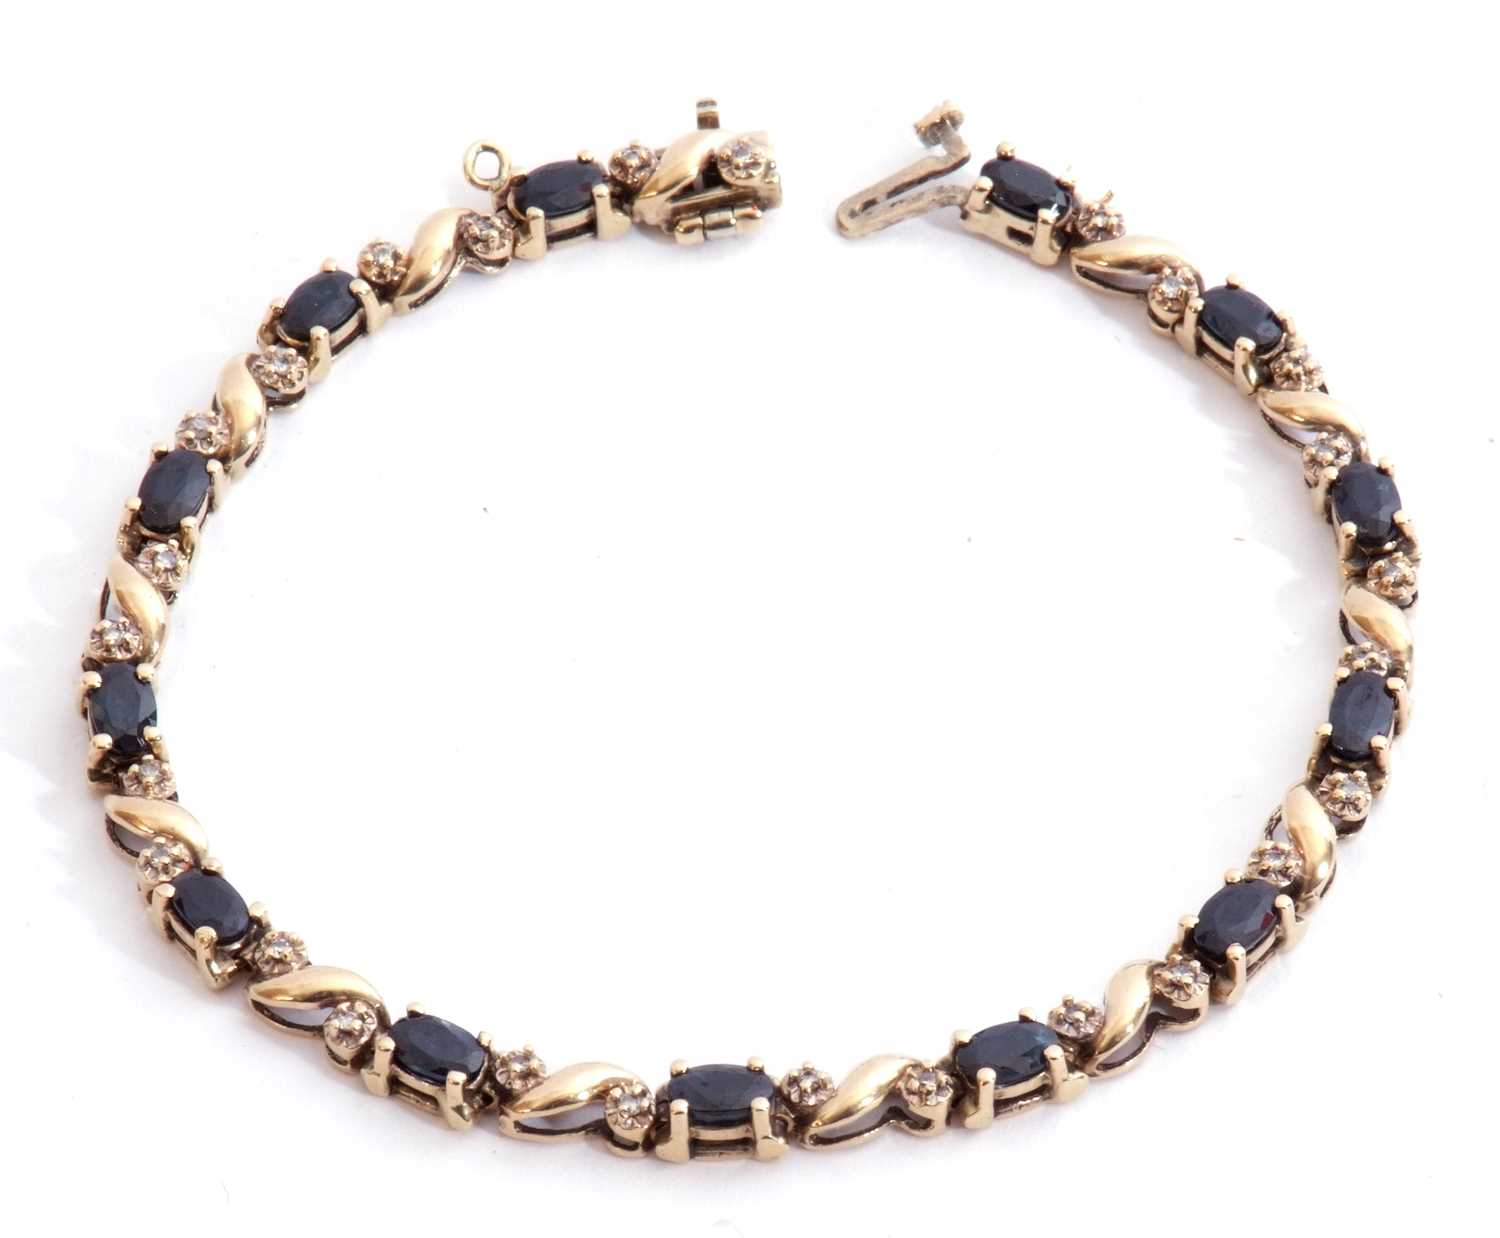 Sapphire and diamond line bracelet, alternate set with 13 oval shaped dark sapphires and 26 small